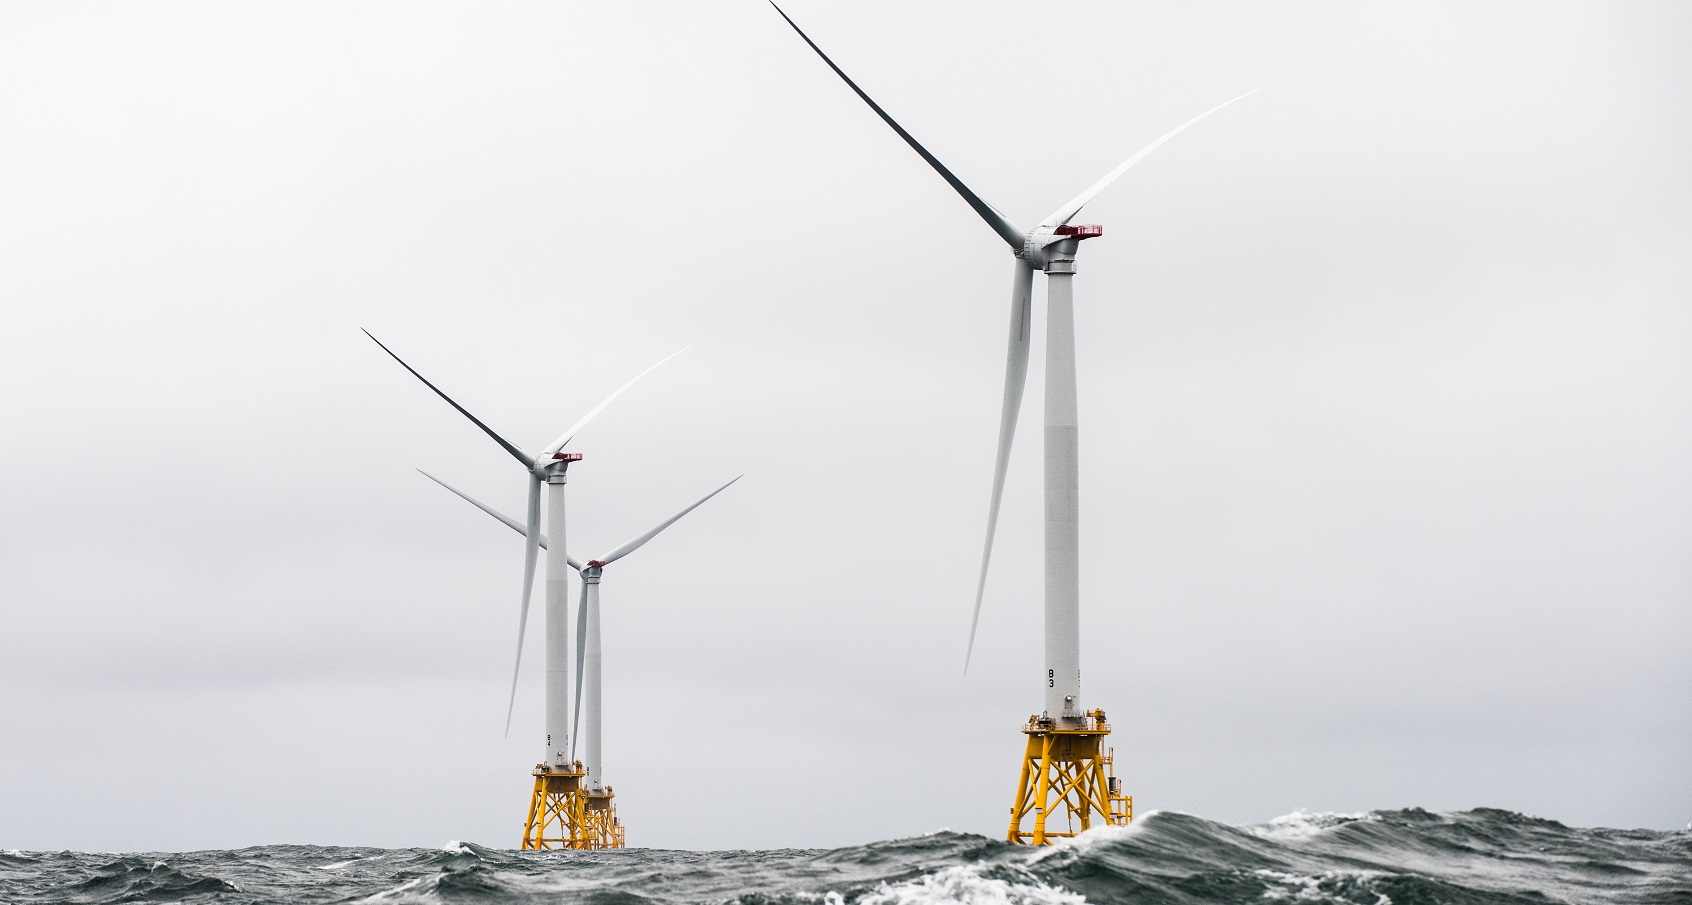 A photo of three offshore wind turbines in turbulent water.